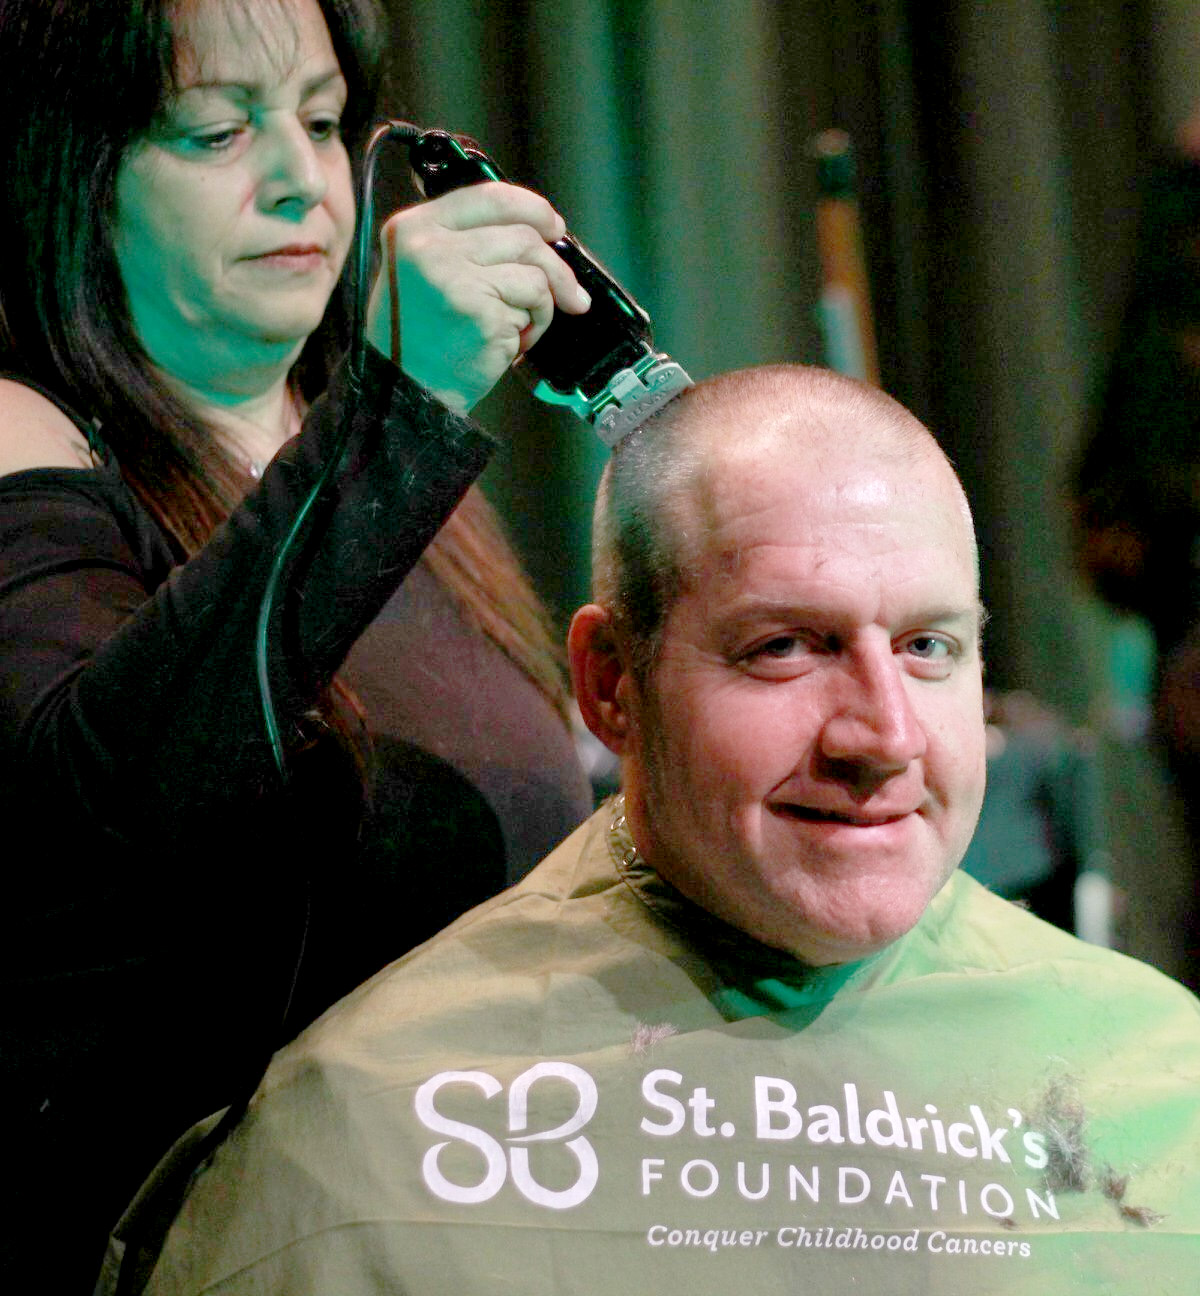 South High Principal Christopher Gitz has his head shaved by staff member Suzanne Jersey at the school’s annual St. Baldrick’s event. (Photo courtesy of the Great Neck Public Schools)